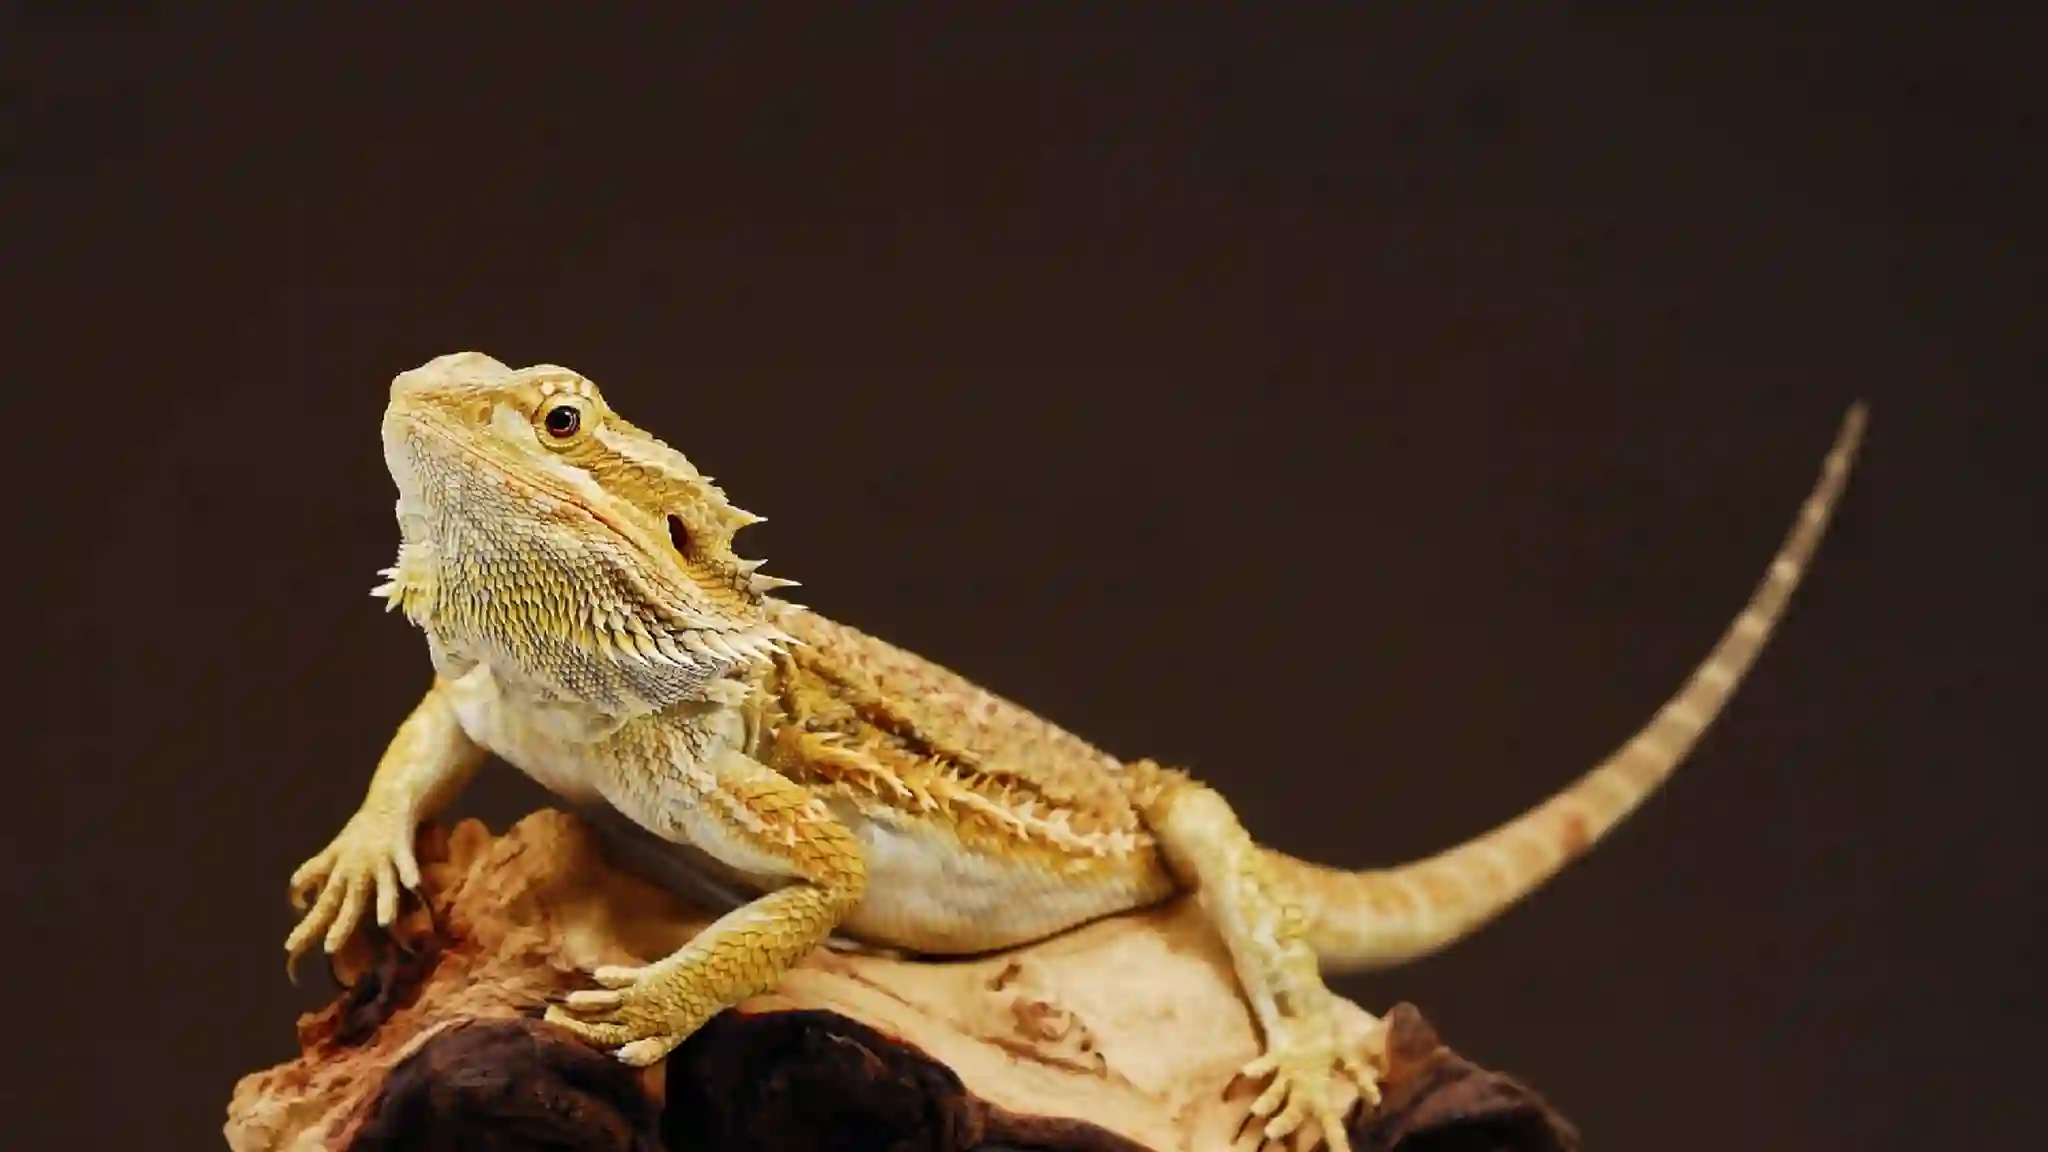 Can Bearded Dragons Eat Earthworms?